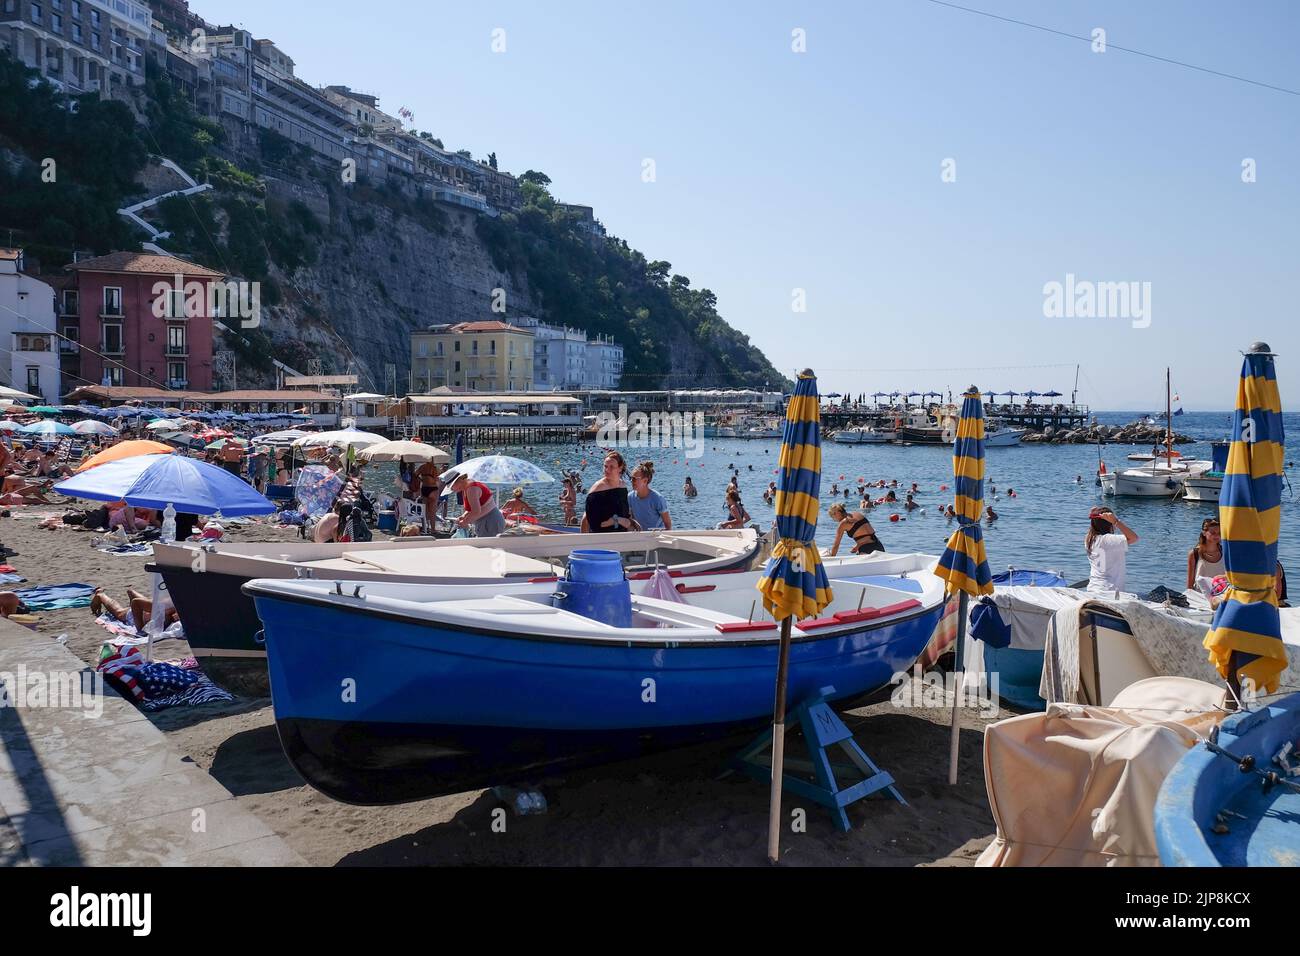 Views over Marina Grande Sorrento Italy a small working traditional  fishing harbour popular with sea food restaurants and tourists. Stock Photo